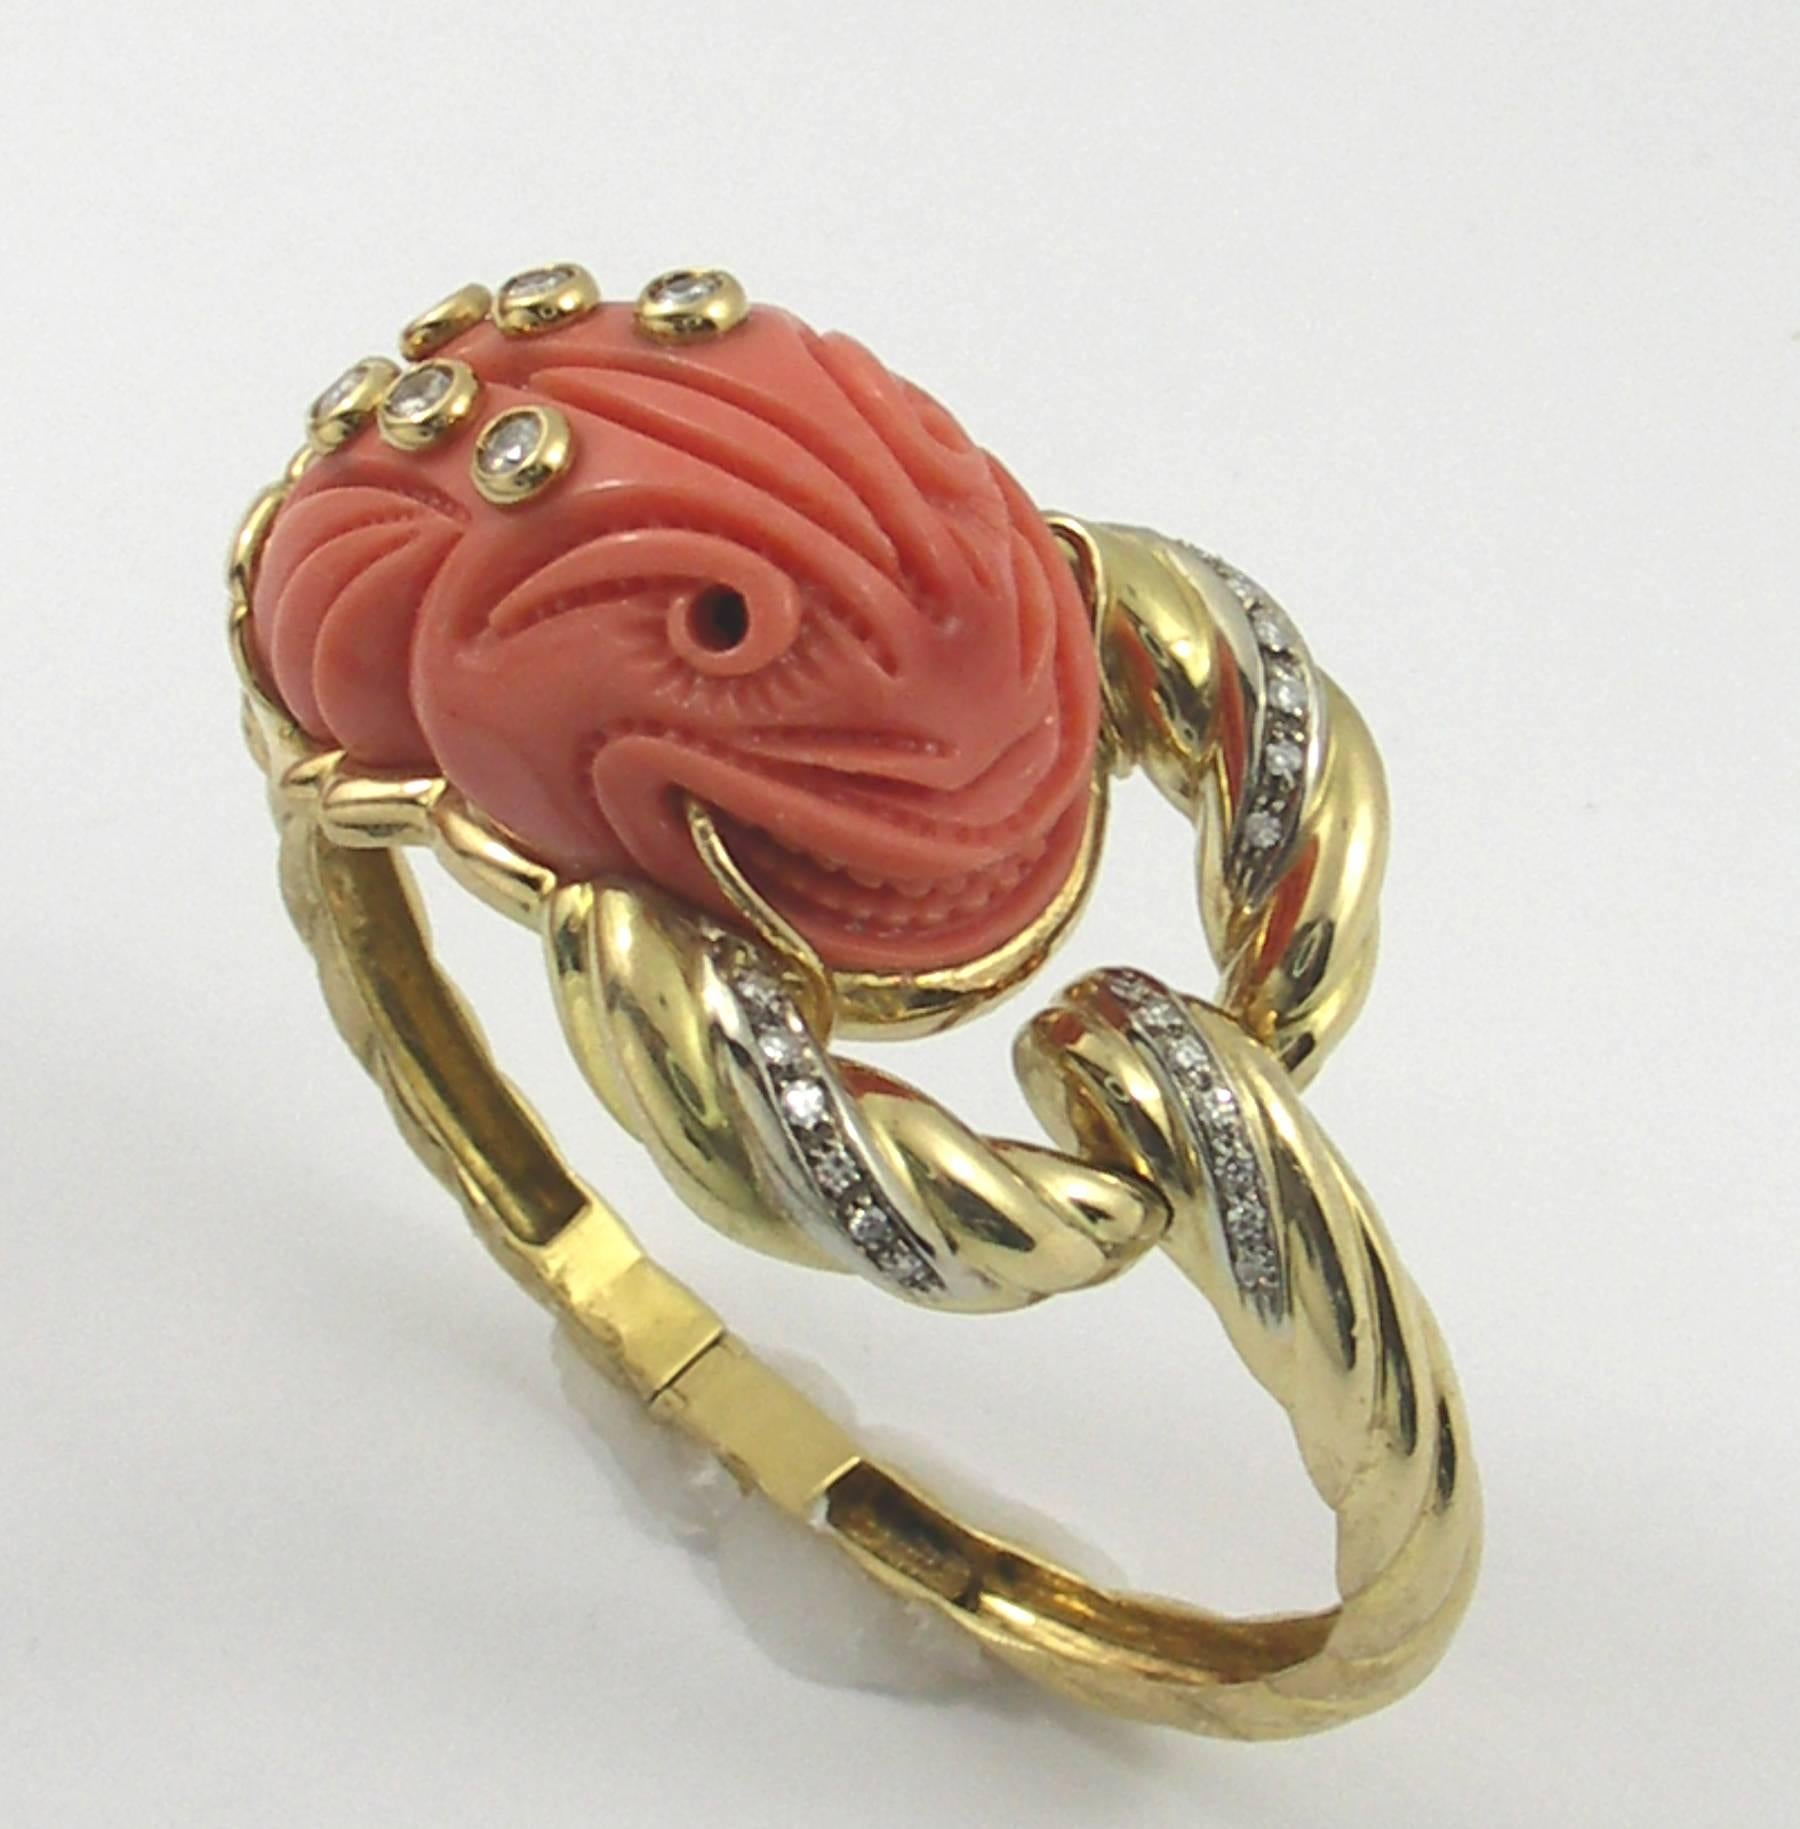 One ladies 18K yellow gold bracelet signed Mario Fontana, featuring an intricately carved coral creature. Measuring 1/4 of an inch wide at the clasp, it opens up to a substantial 2 5/8 inches at the widest part of the design area. This beautiful